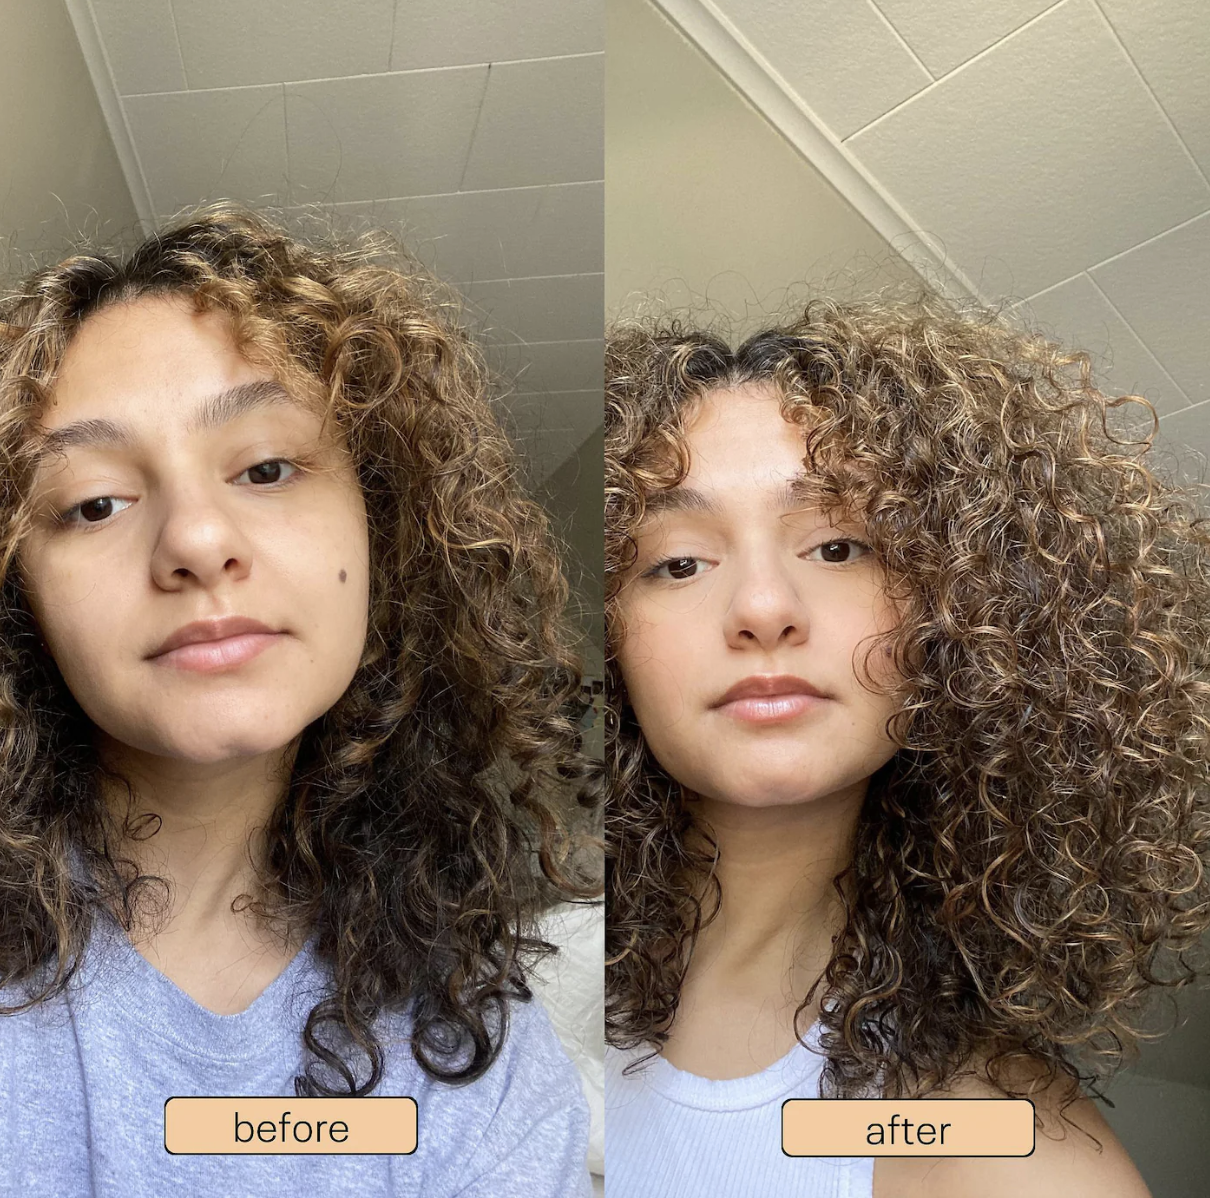 product user with curly hair before and after using the cream, the after with more defined curls